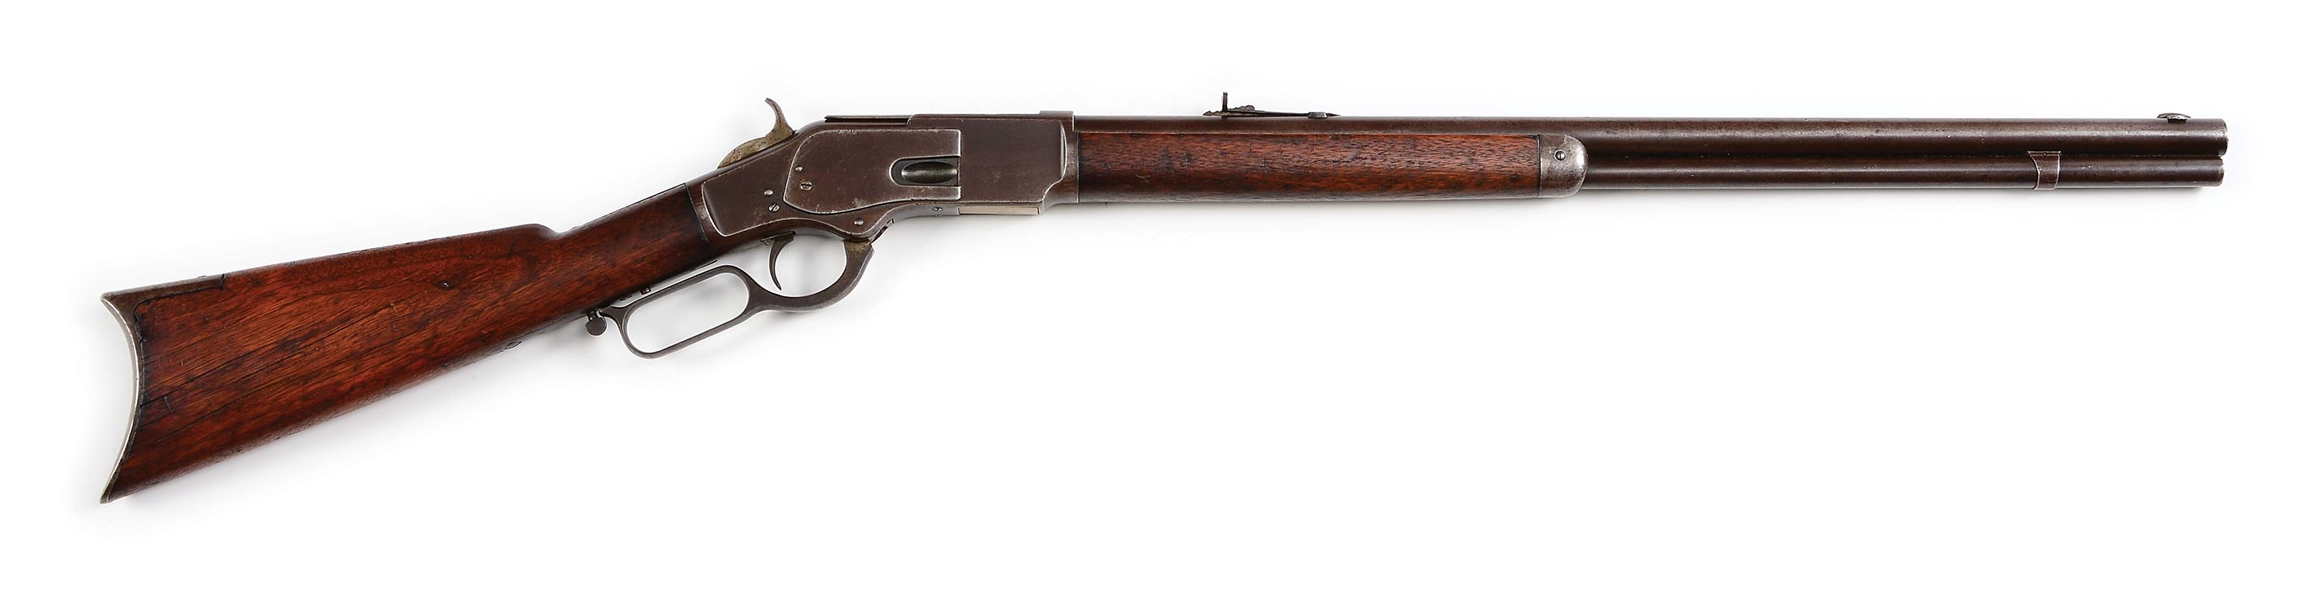 (A) 1ST MODEL WINCHESTER MODEL 1873 LEVER ACTION RIFLE (1877).